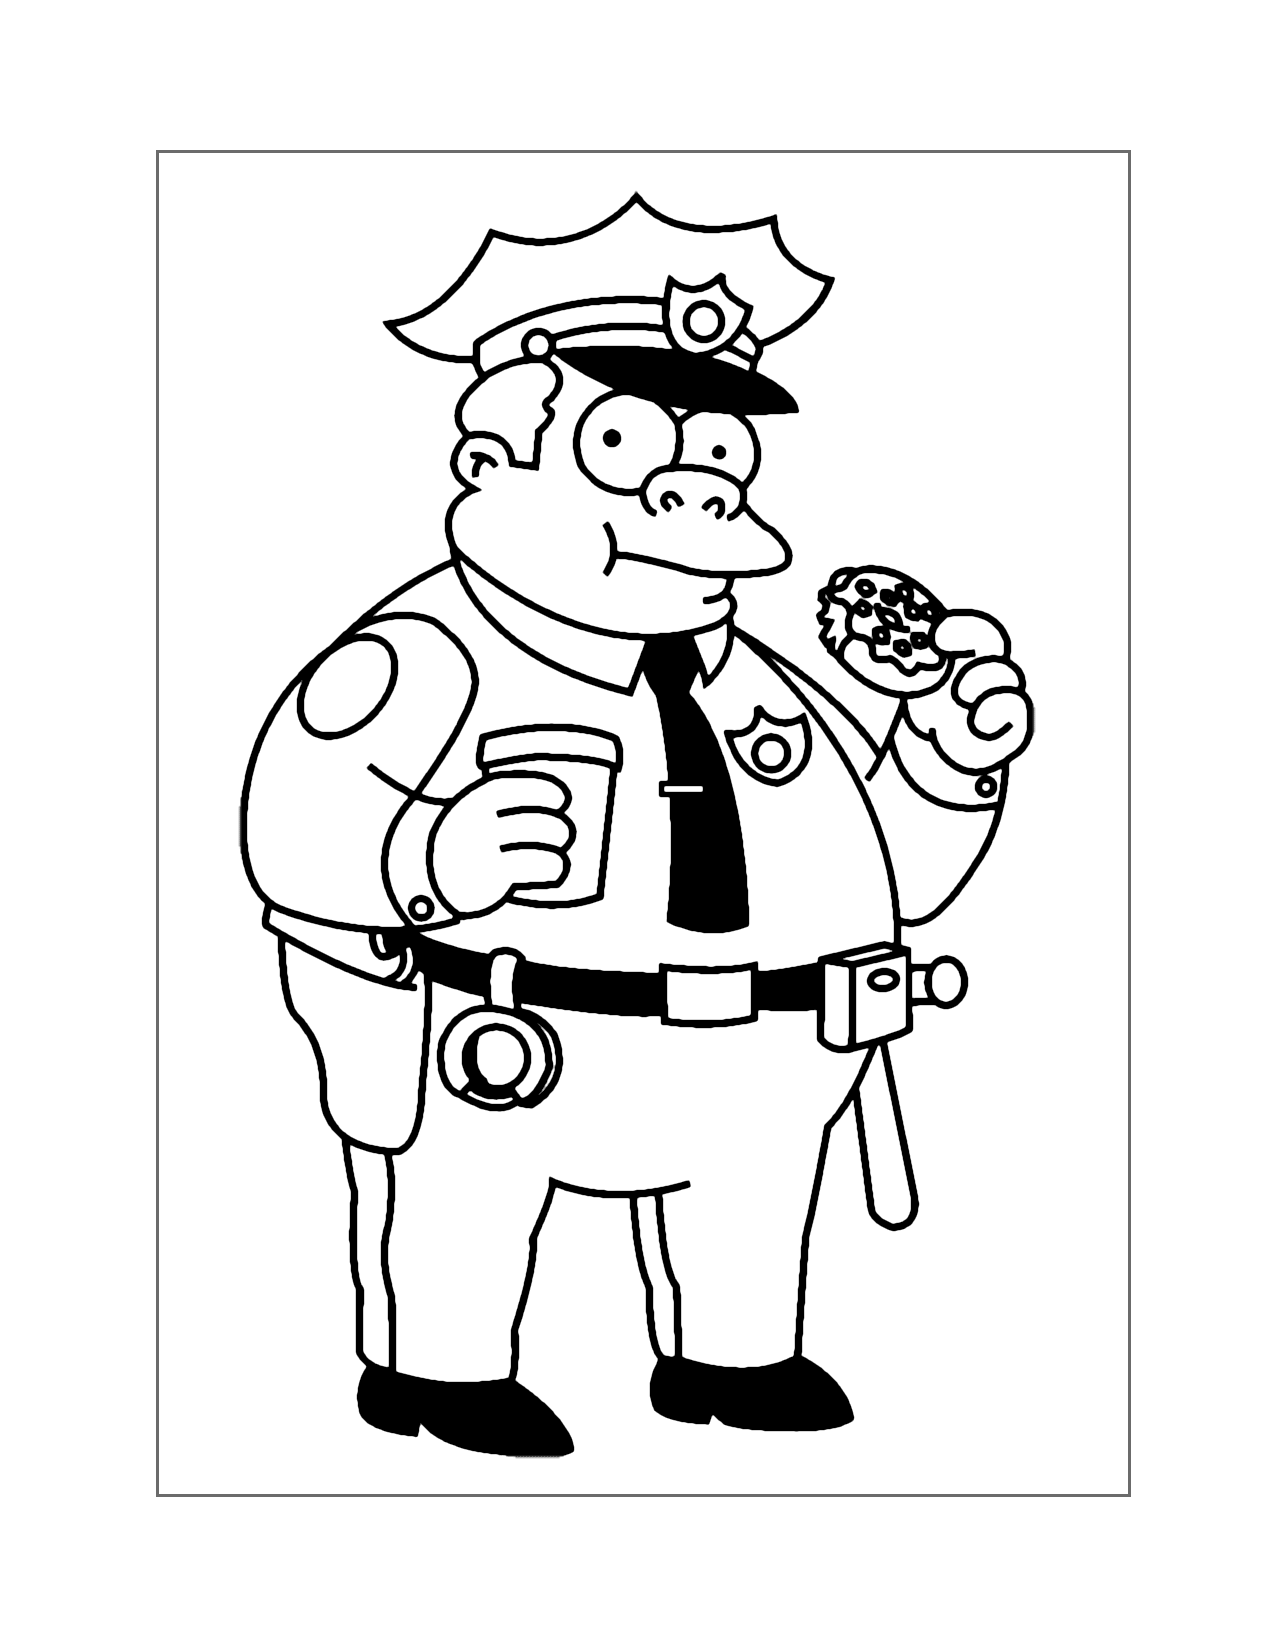 Chief Wiggum Simpsons Coloring Page